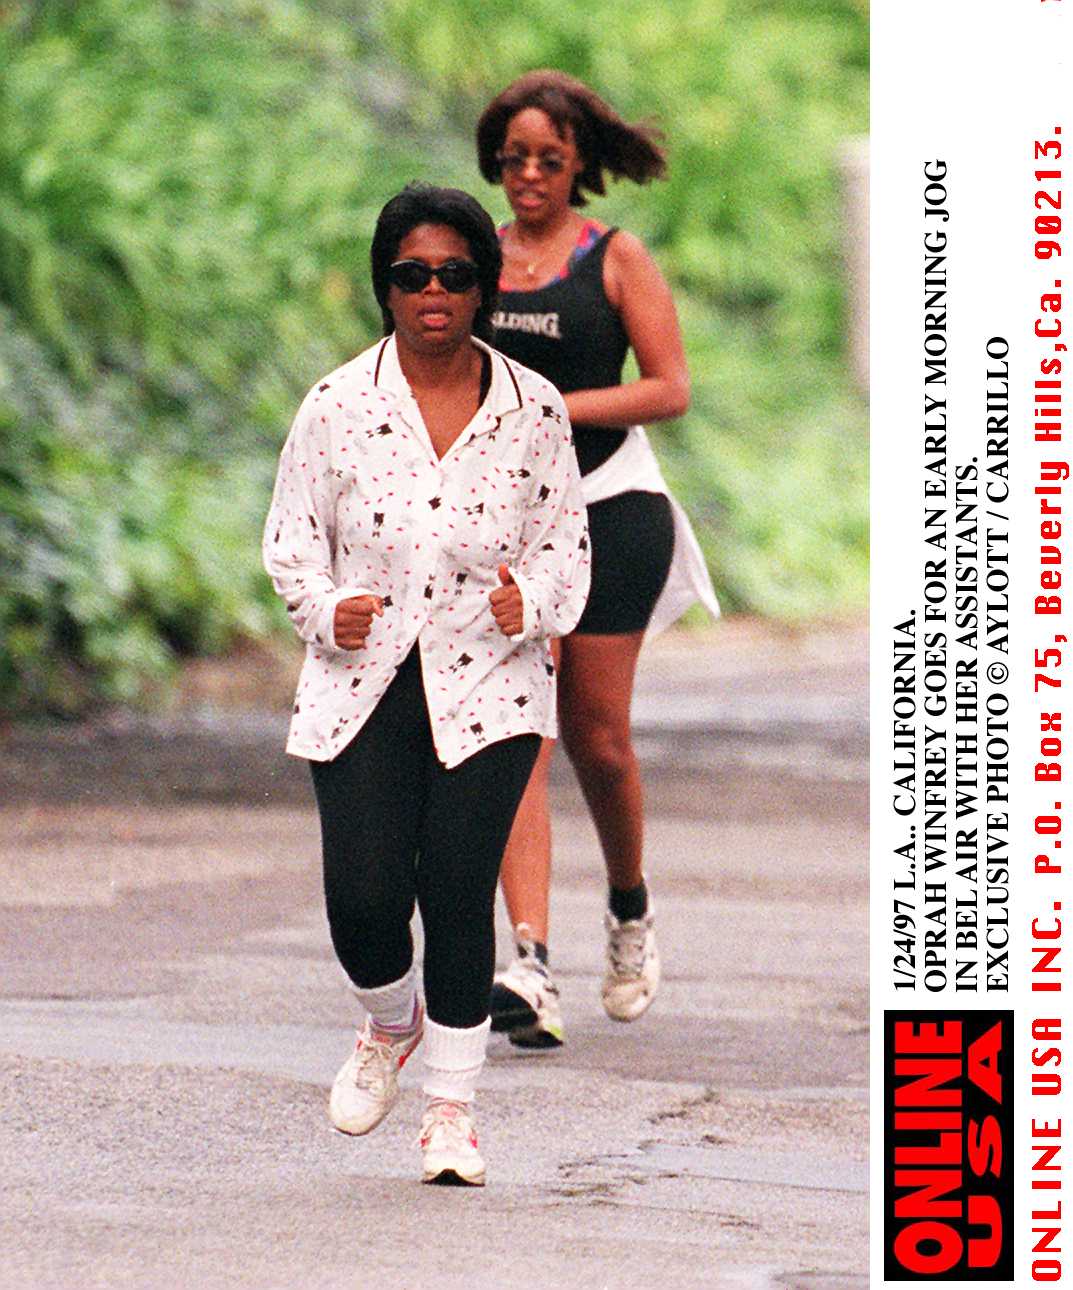 Oprah Winfrey jogging with her assistants in Bel Air on January 24, 1997, Los Angeles, California | Source: Getty Images